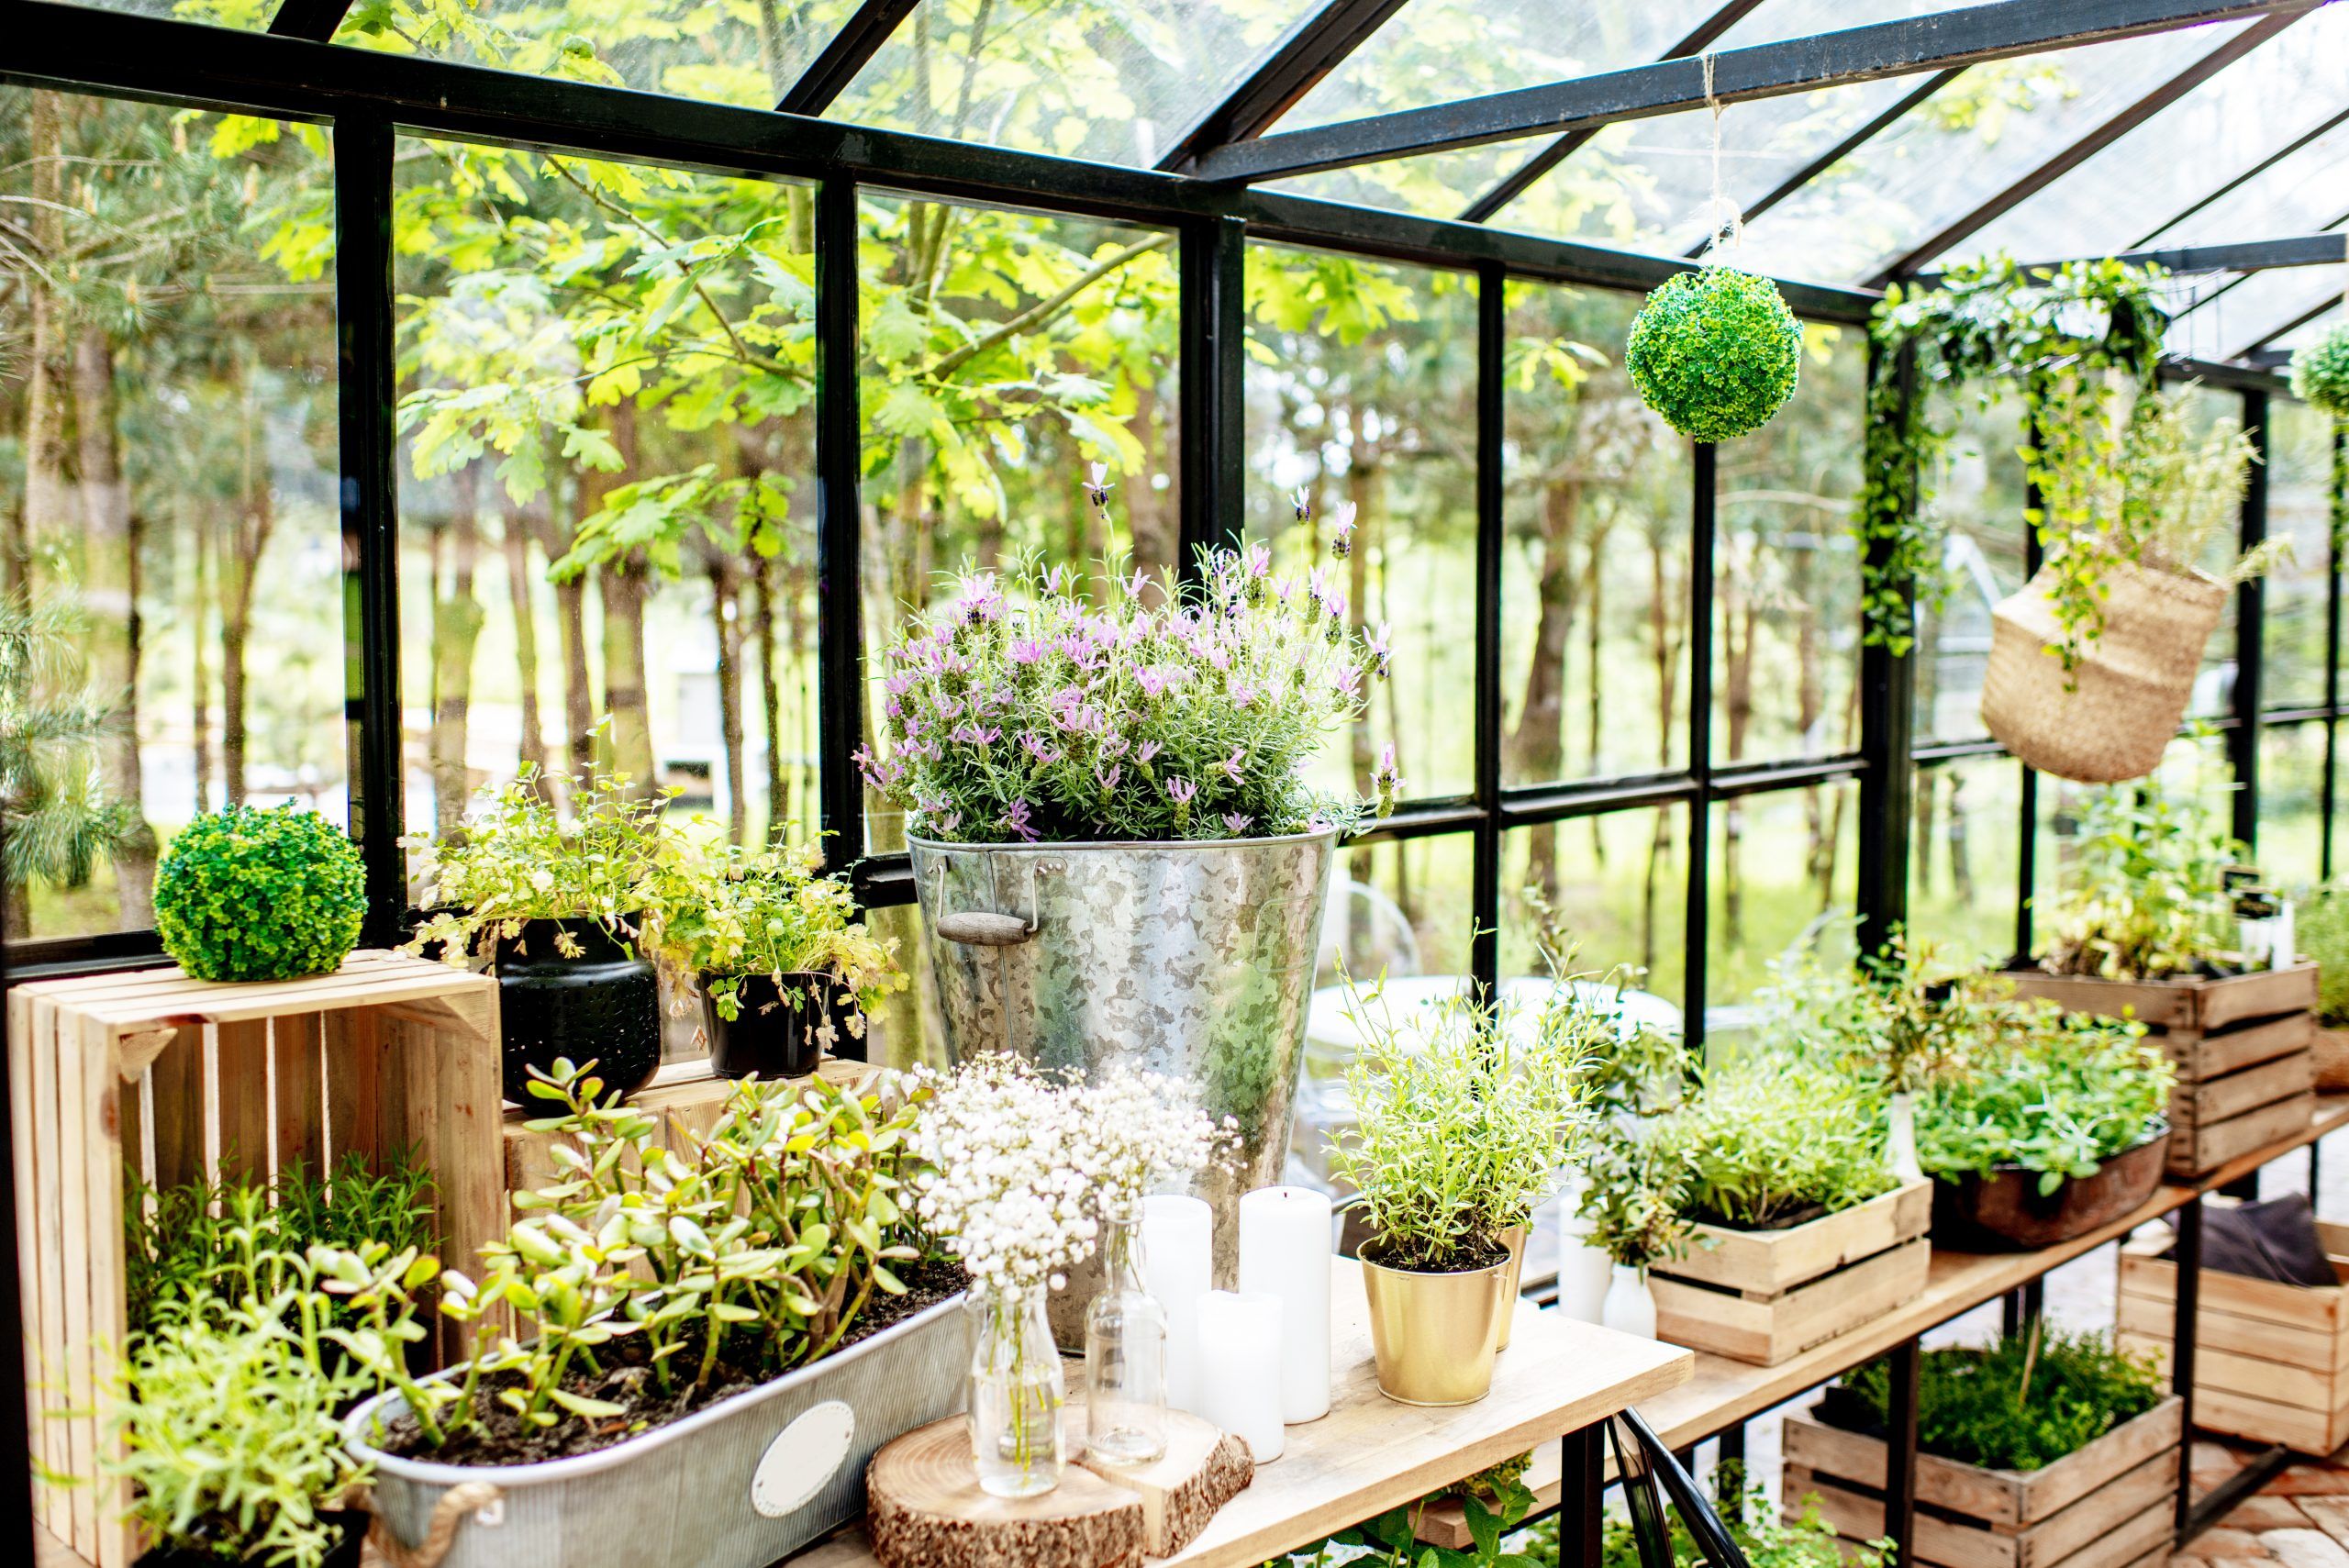 What a Wonderful World: The magic of a greenhouse